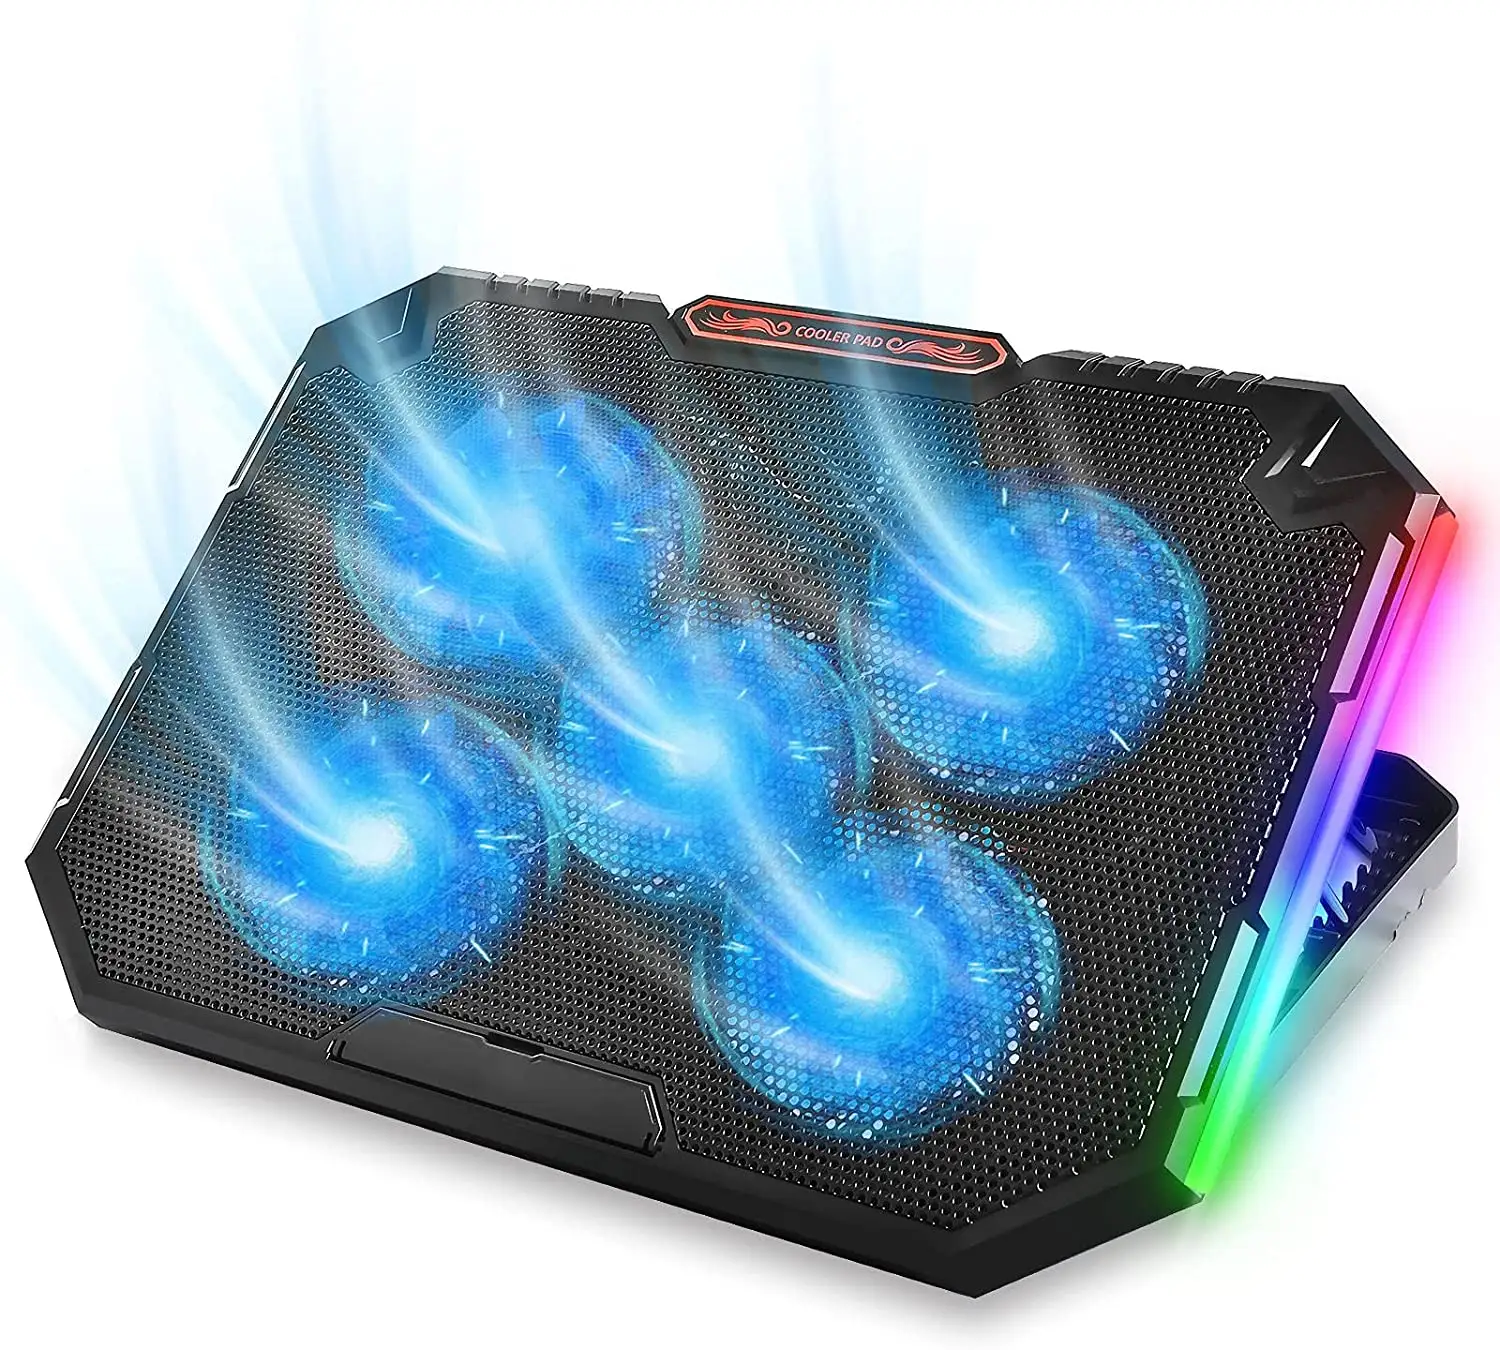 NUOXI 5 Quite RGB Fans Notebook Cooler Laptop Cooler Cooling Pad for 17 Inch